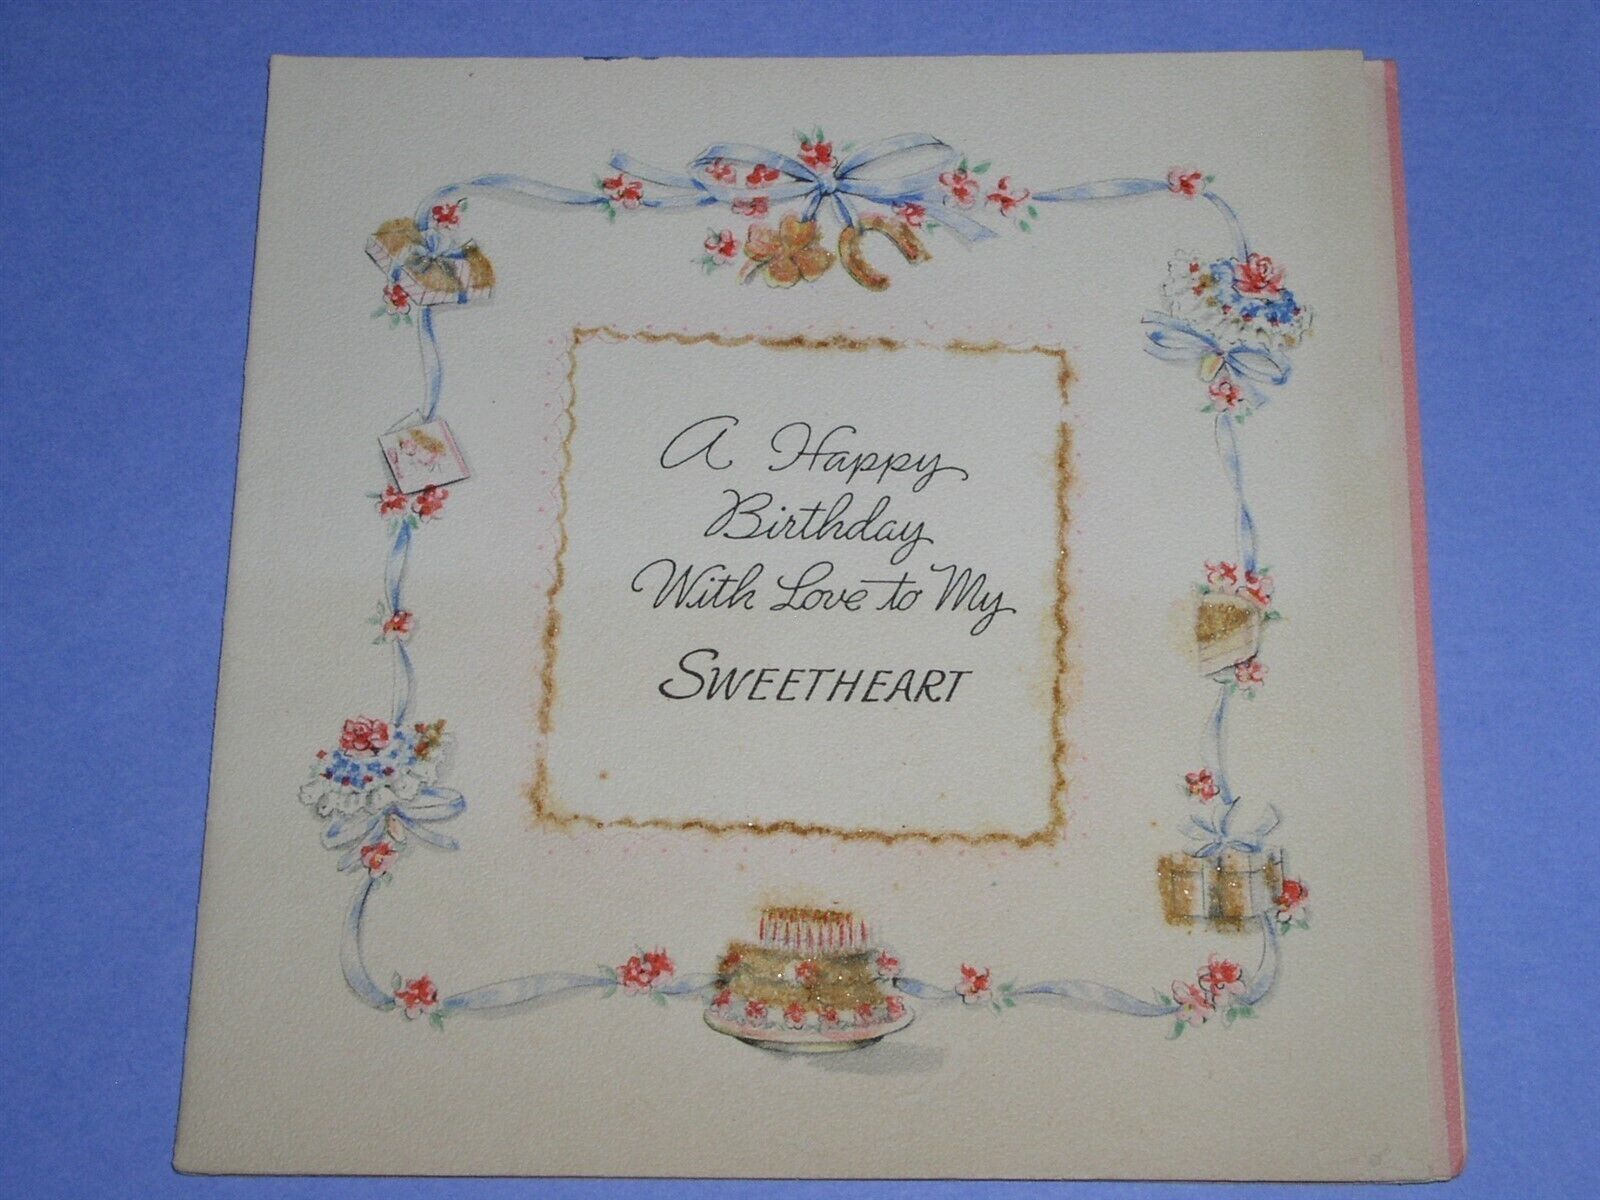 Primary image for HALLMARK BIRTHDAY GREETING CARD VINTAGE 1943 TO MY SWEETHEART SCRAPBOOKING